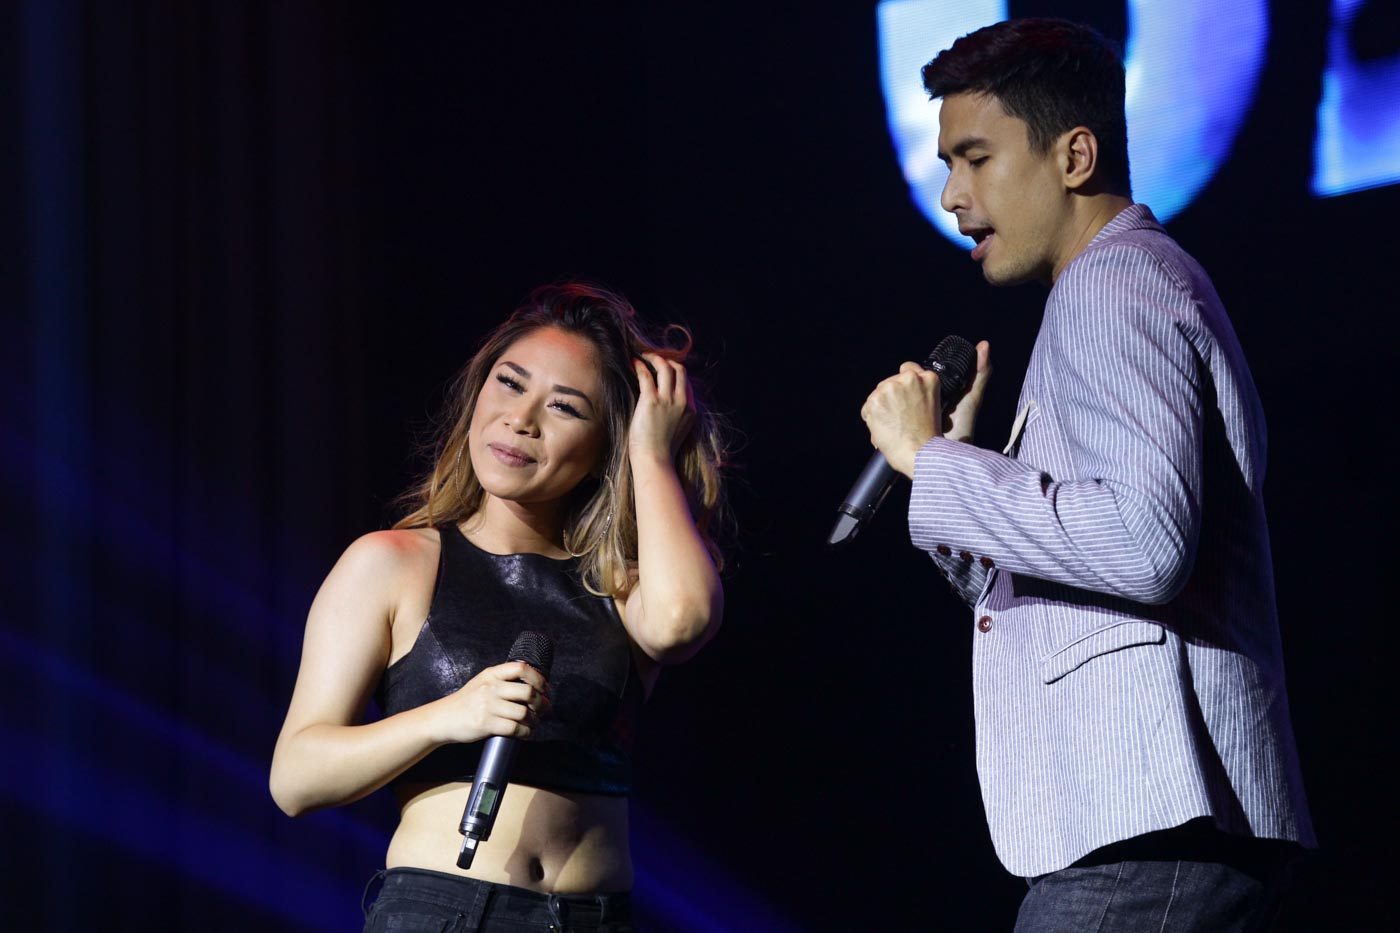 IN PHOTOS: Jessica Sanchez performs with Christian Bautista in Manila